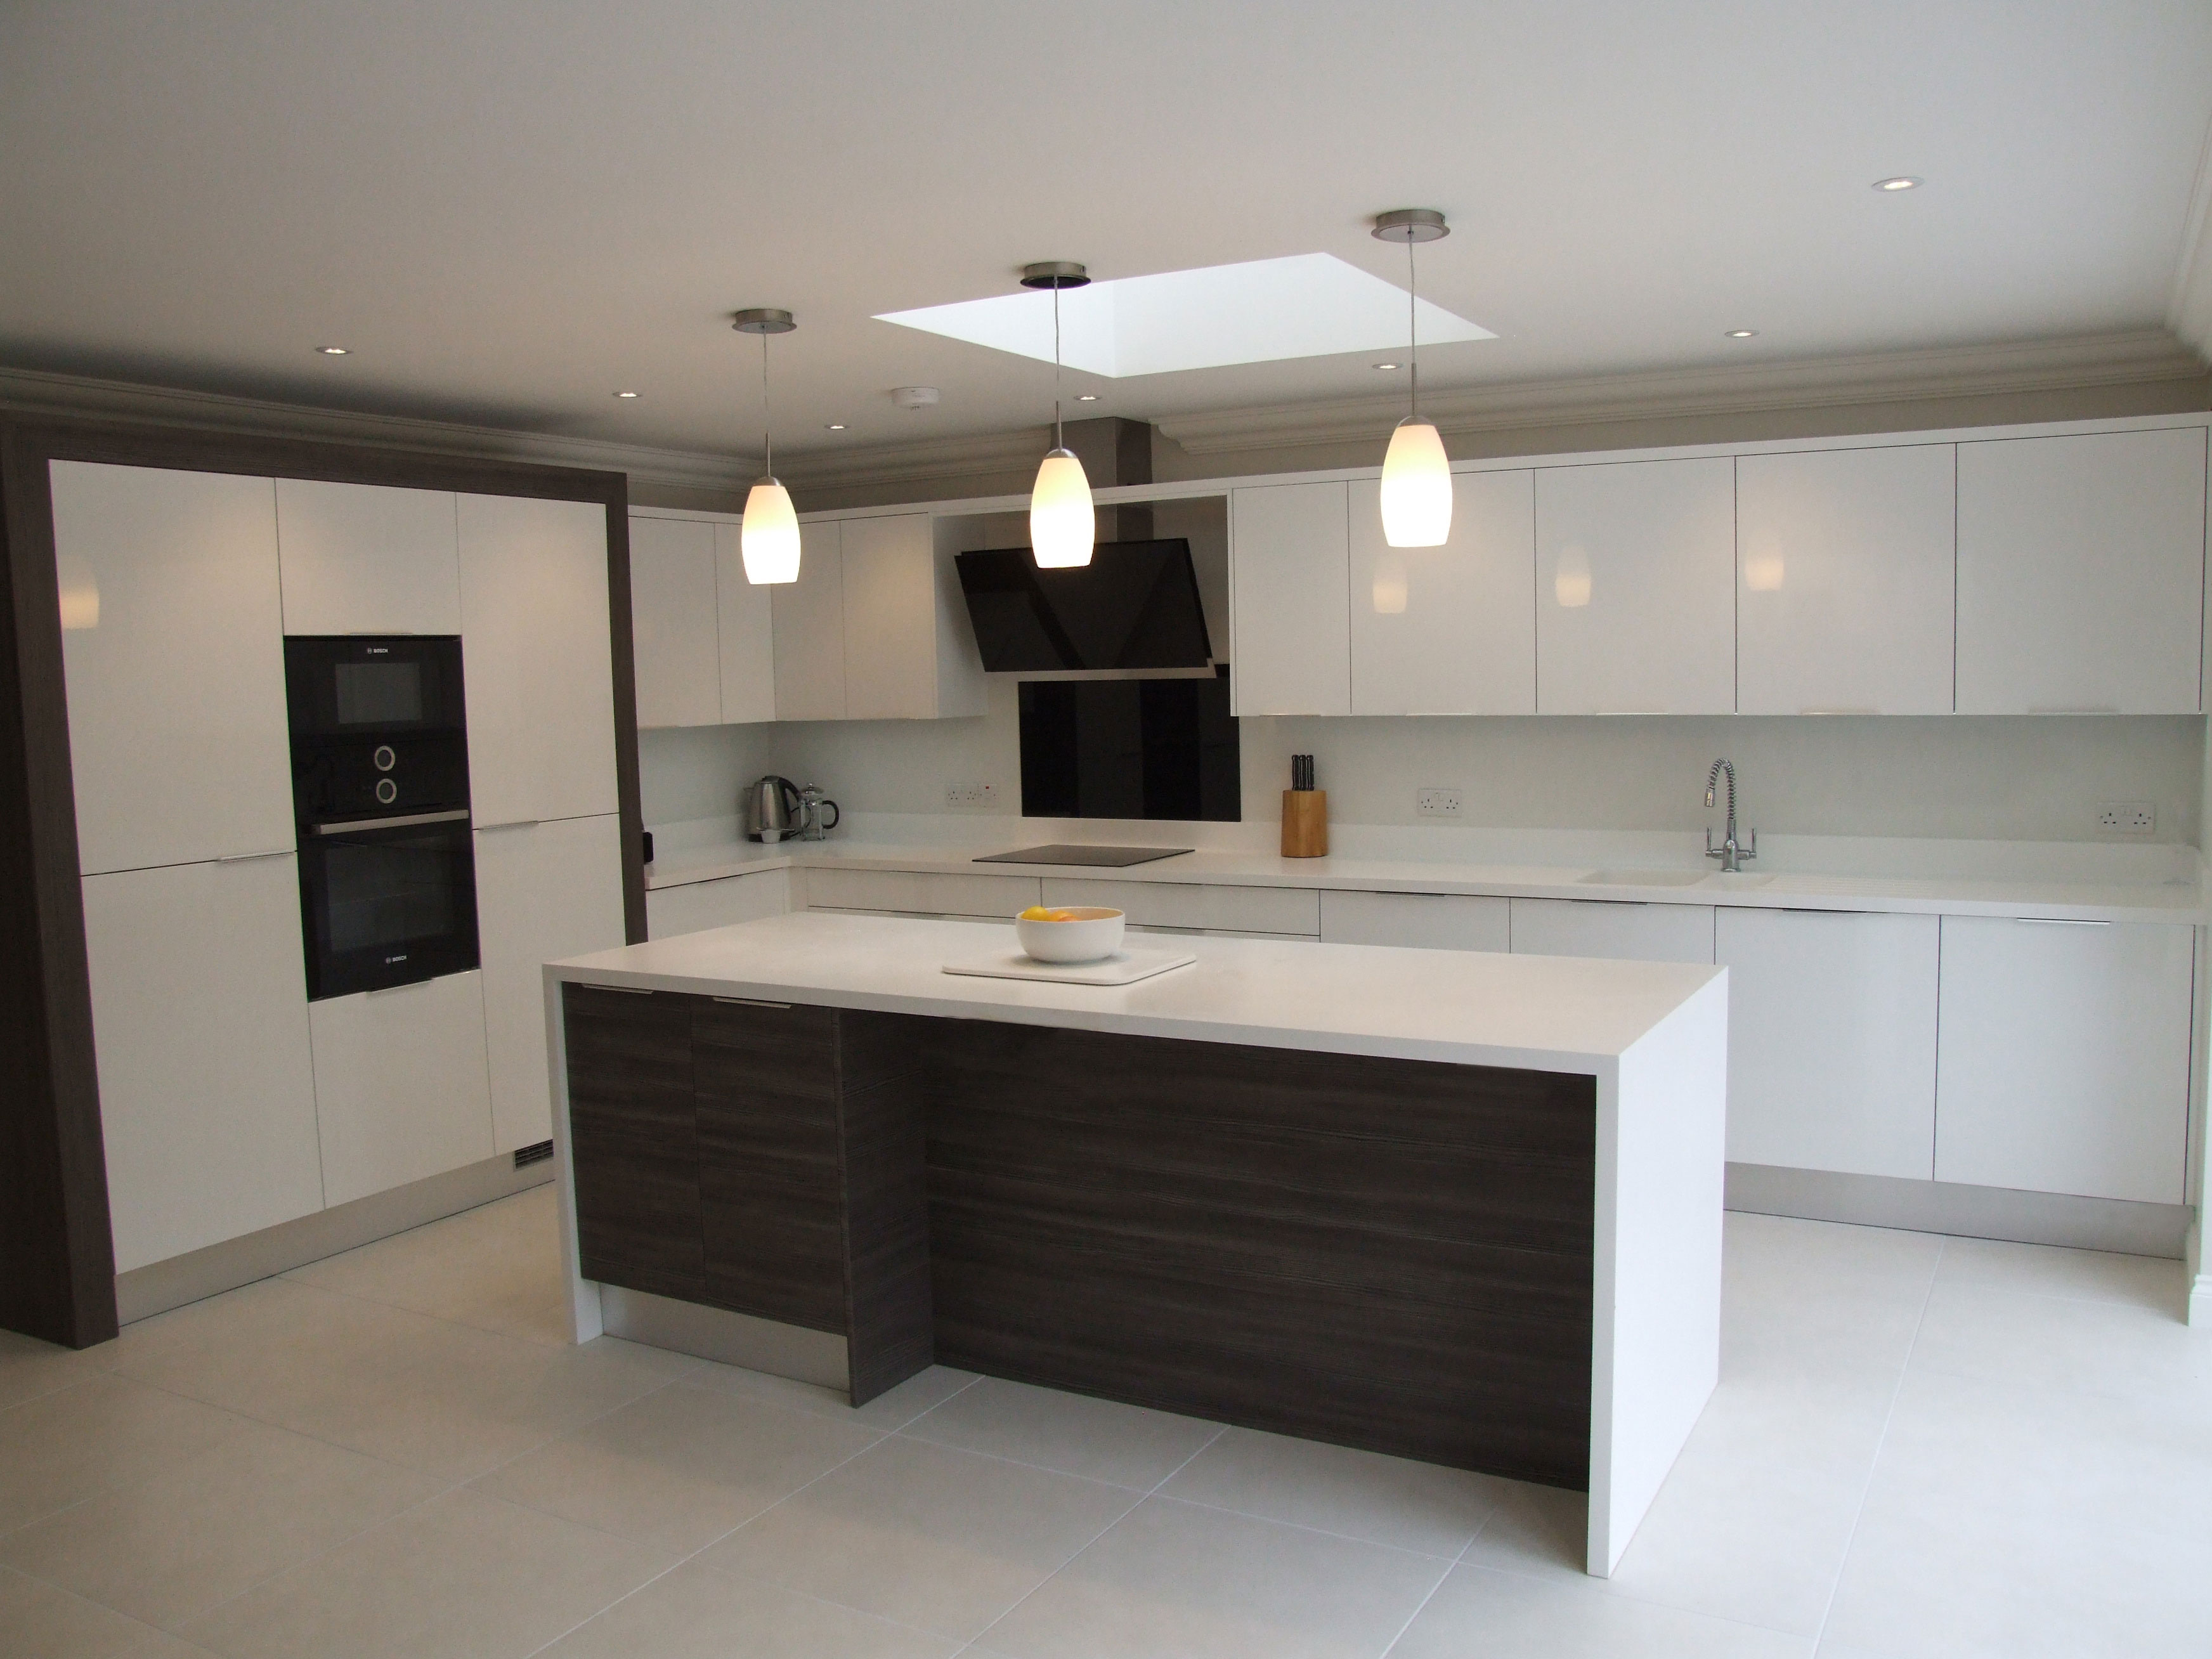 White gloss kitchen with flint grey accent